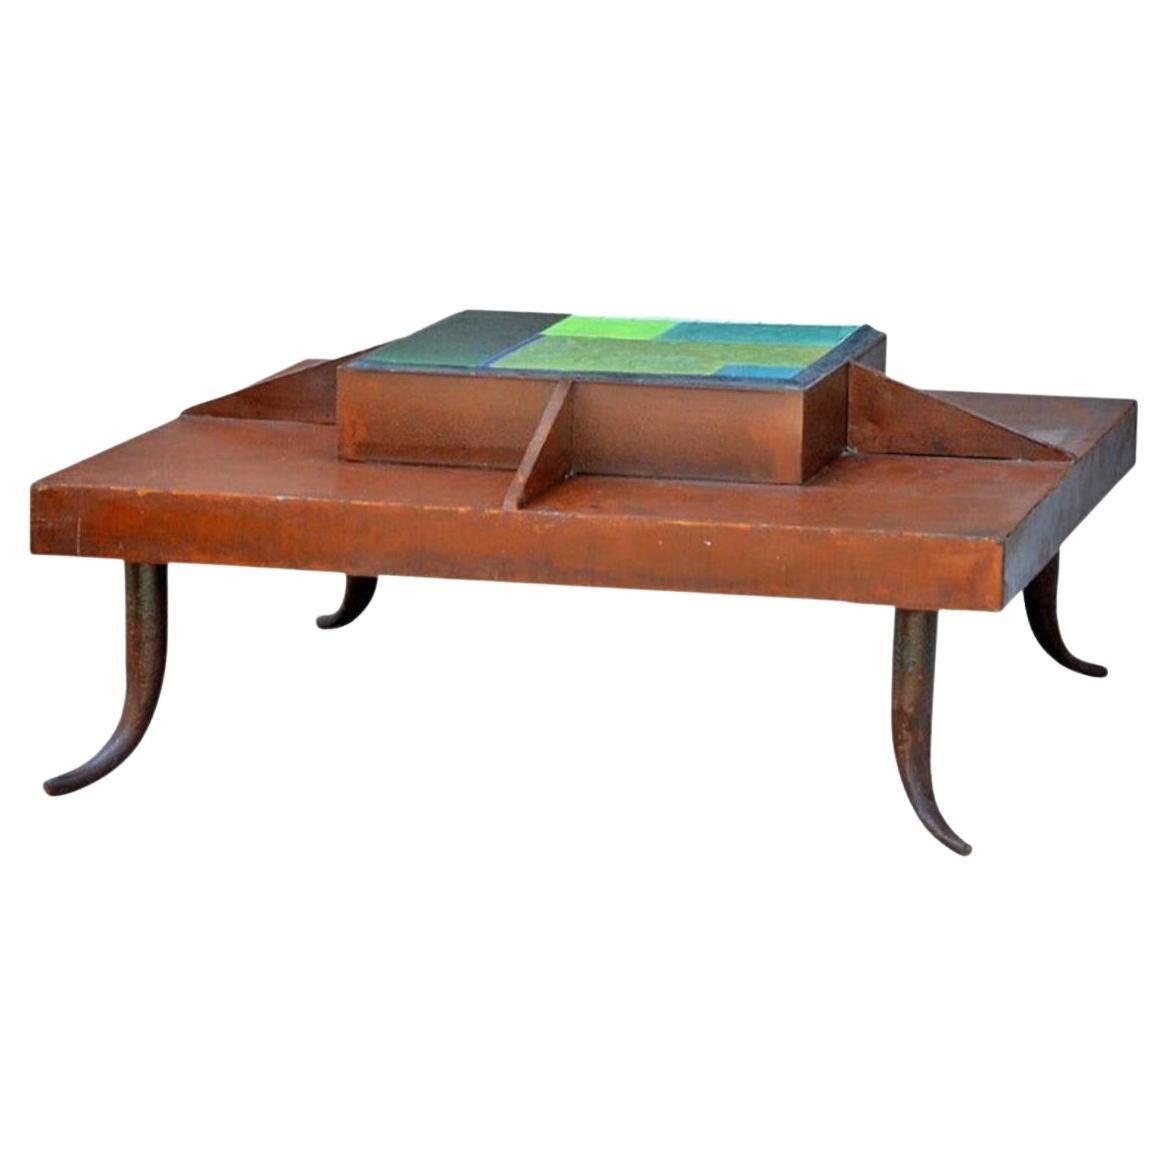 One-of-a-Kind Patinated Steel and Tile Studio Art Coffee Table For Sale